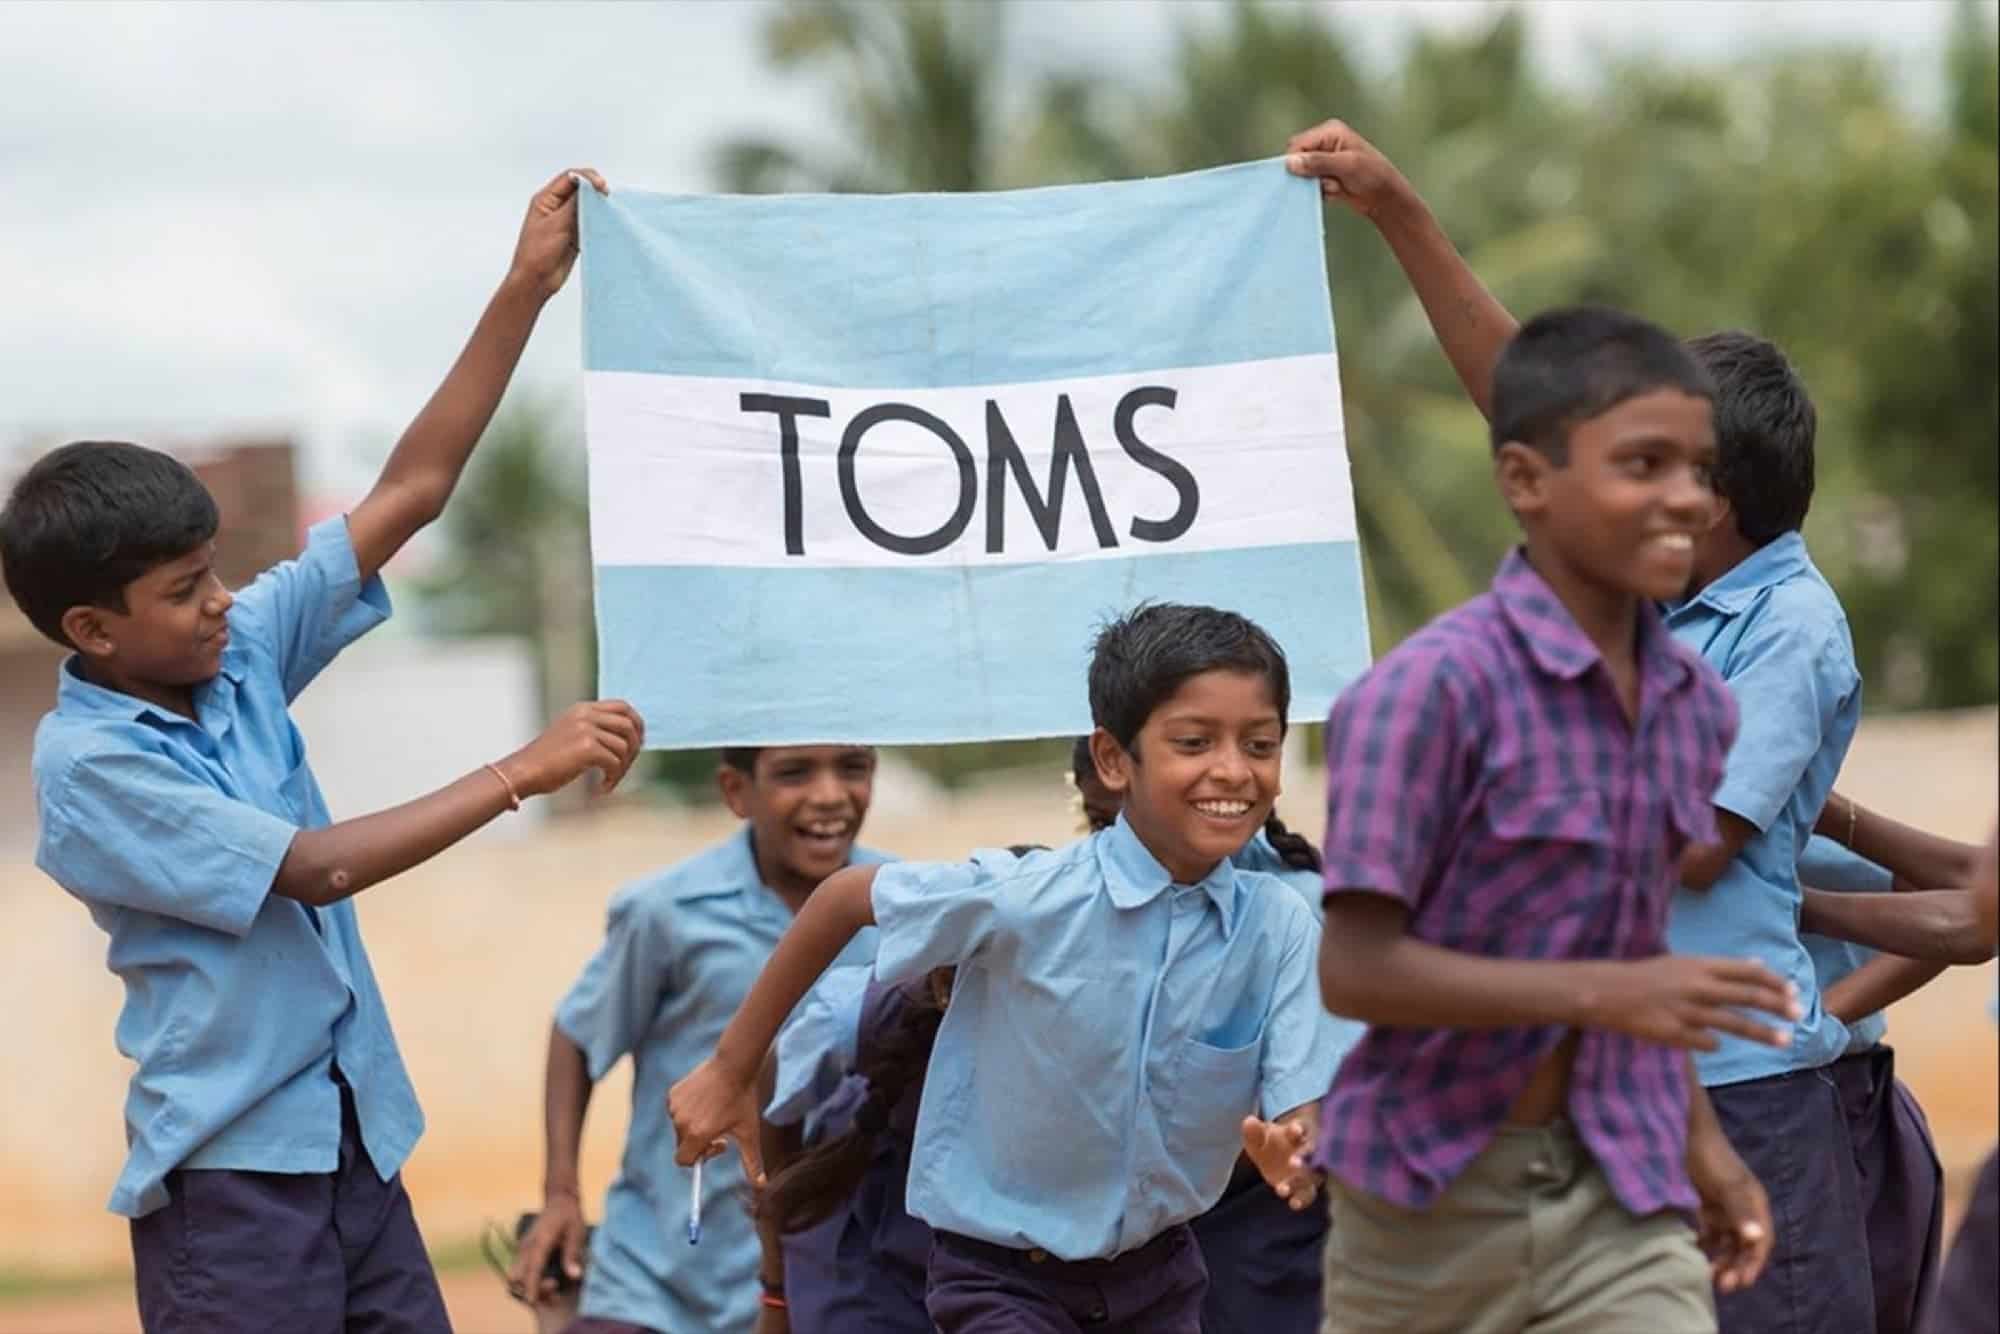 TOMS One for One Program